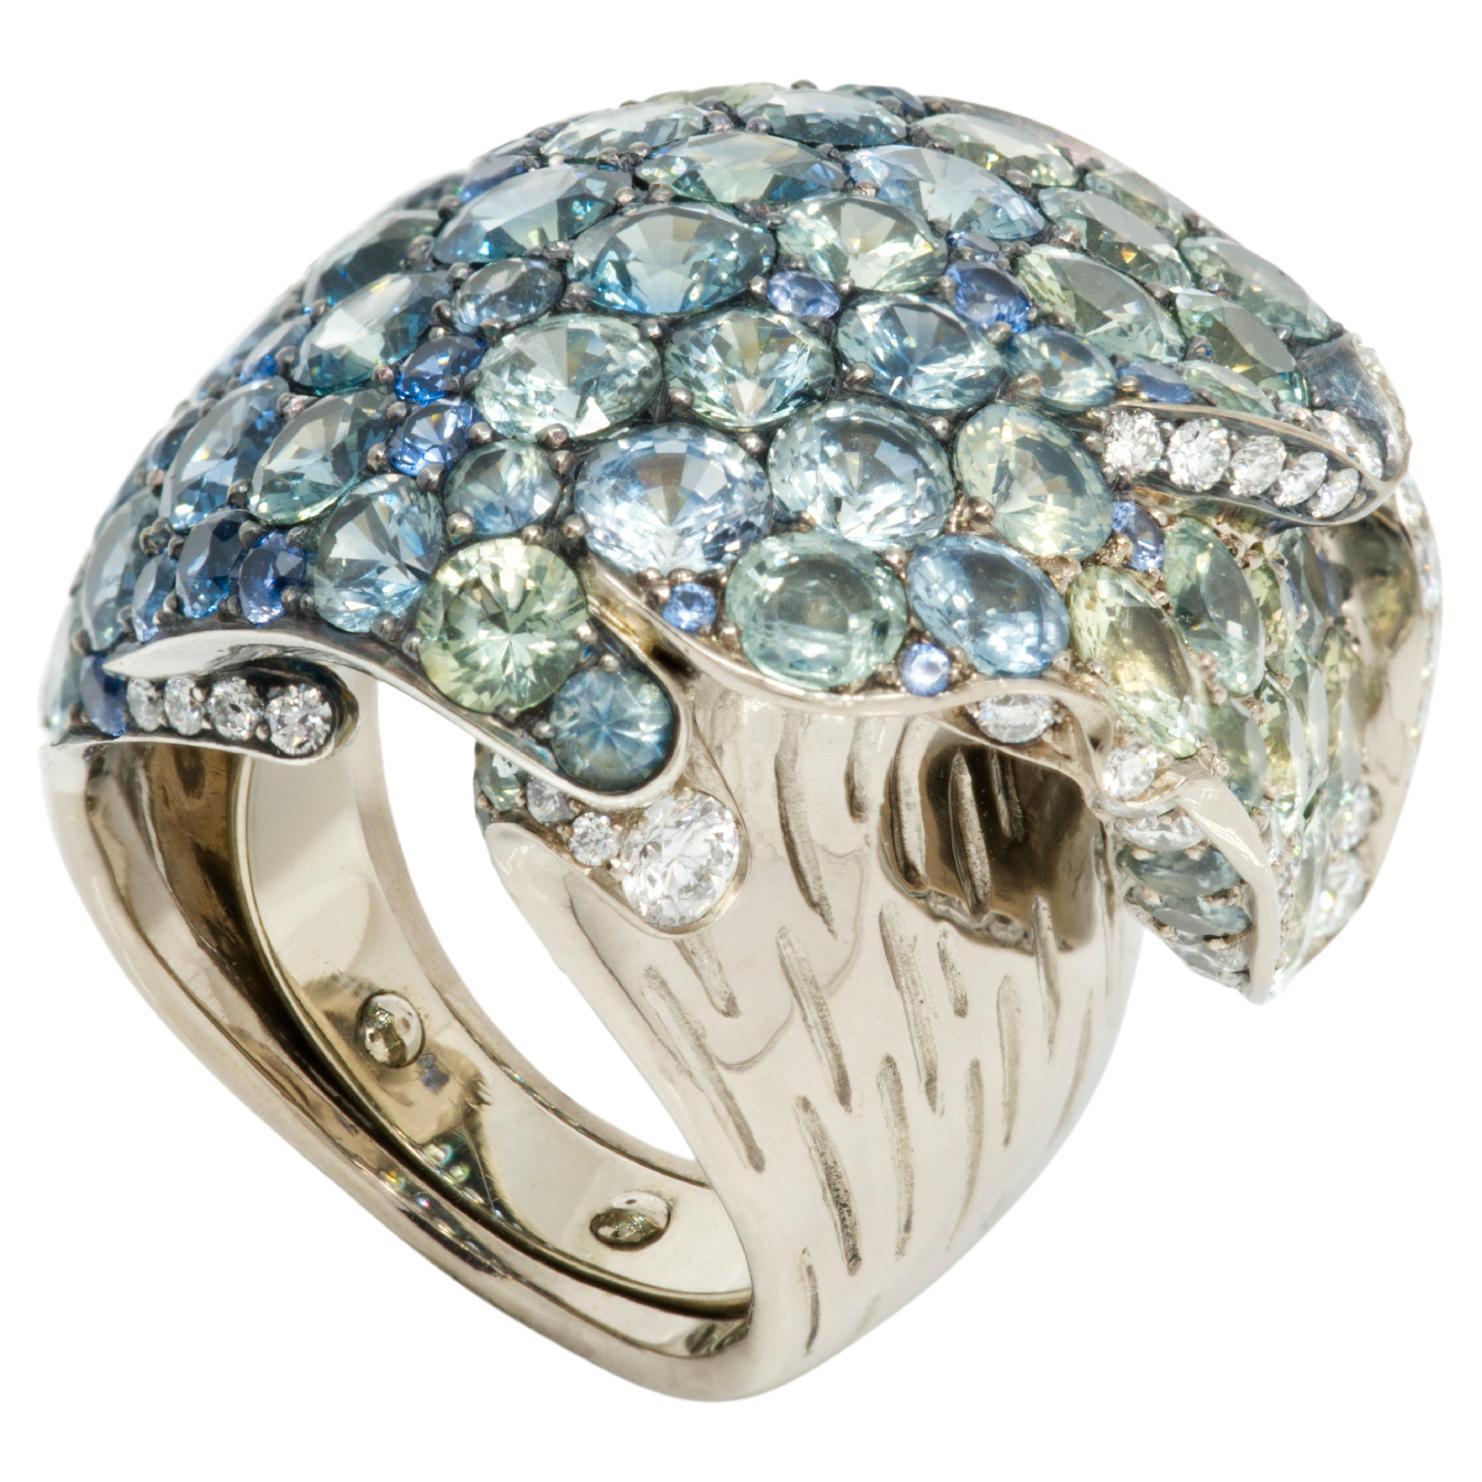 "Breaking wave", Madagascar teal unheated sapphires and diamonds cocktail ring